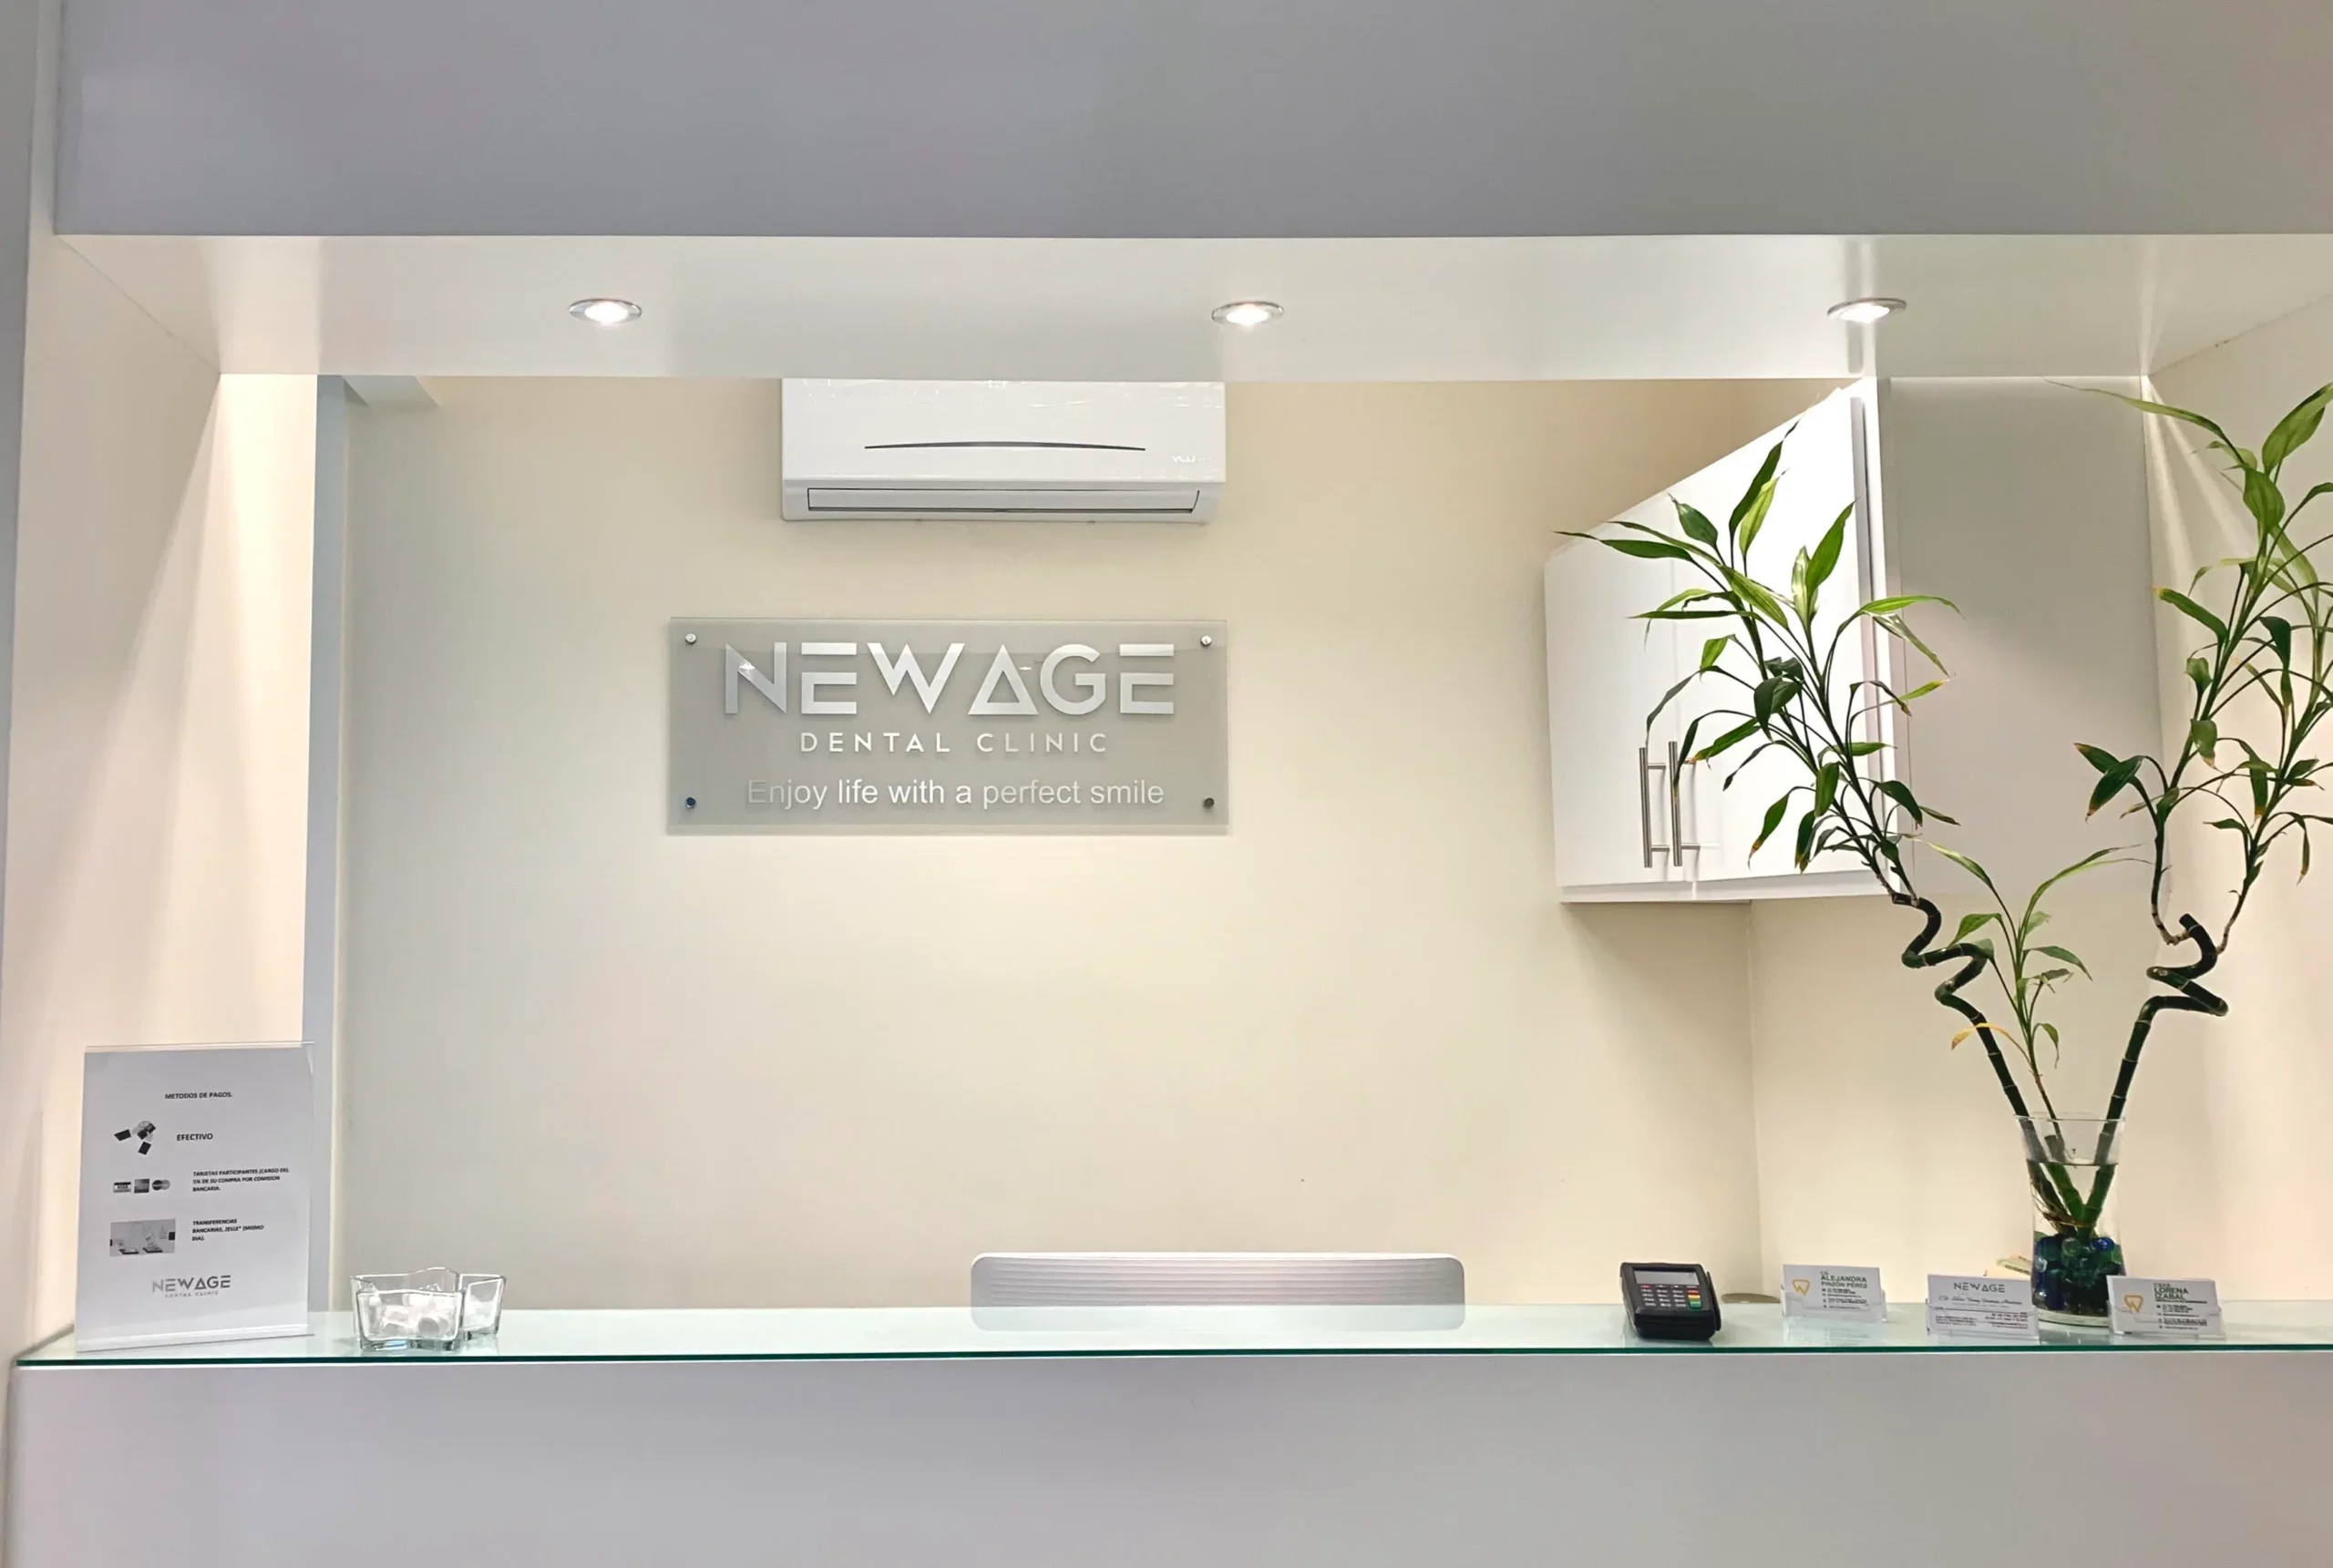 Looking for a dentist in TJ that takes US Insurance? Check out the reception area with a newage sign.